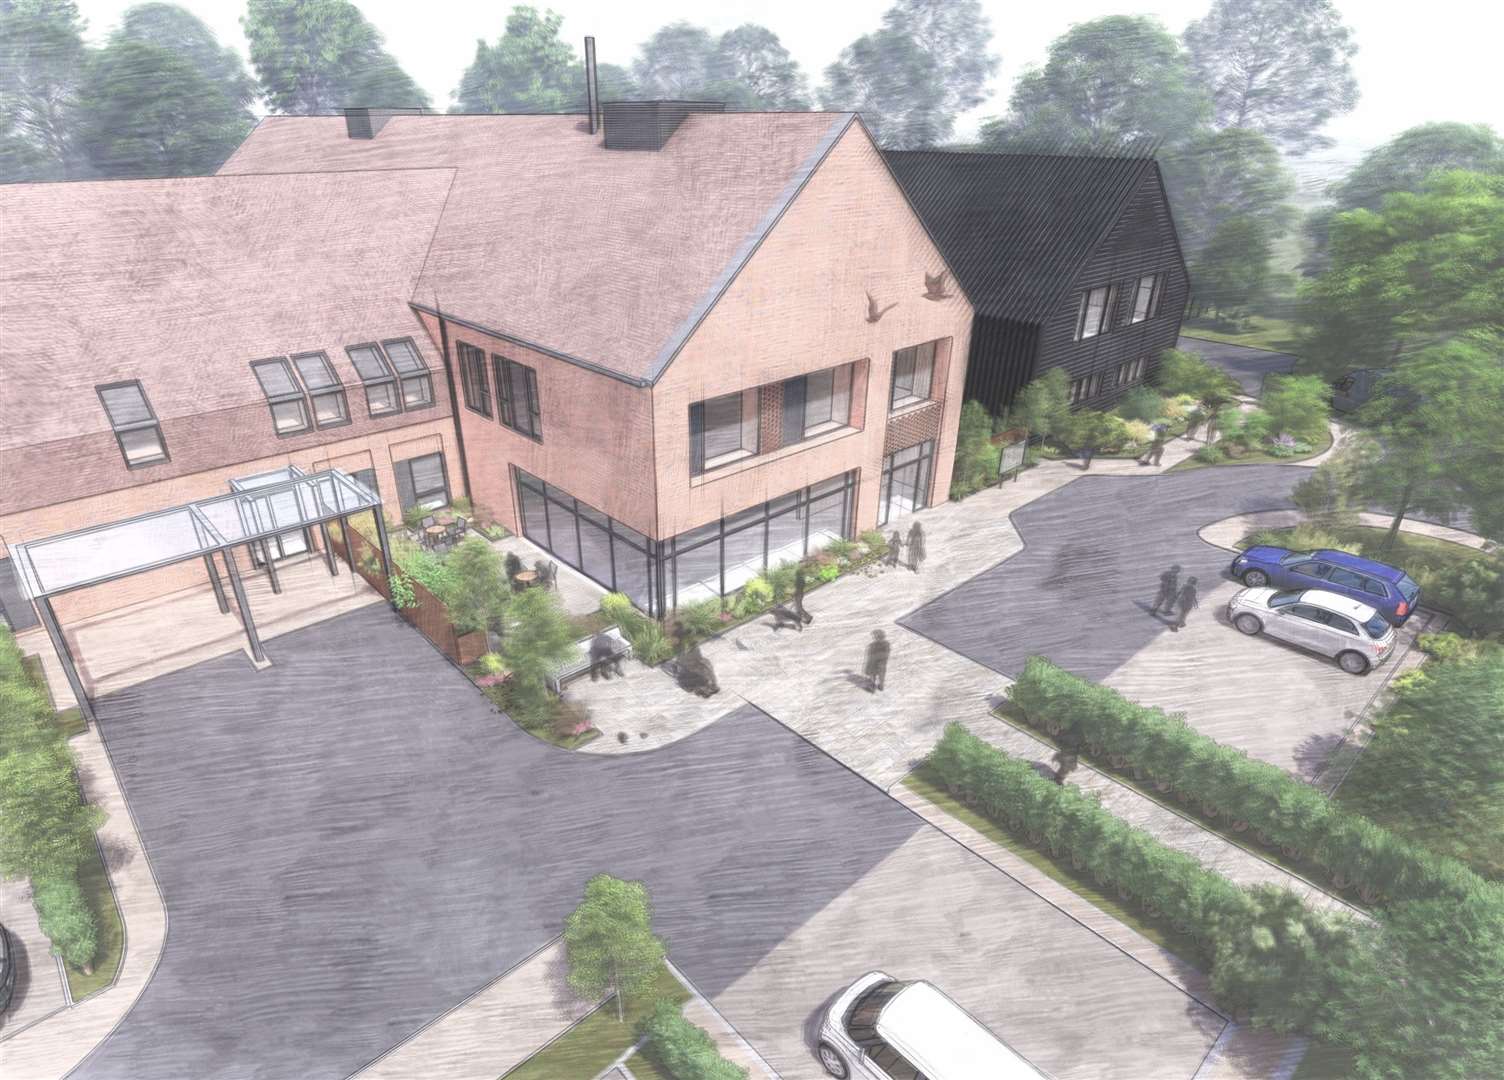 Sketches of the approved Pilgrims Hospice building which will be built on site